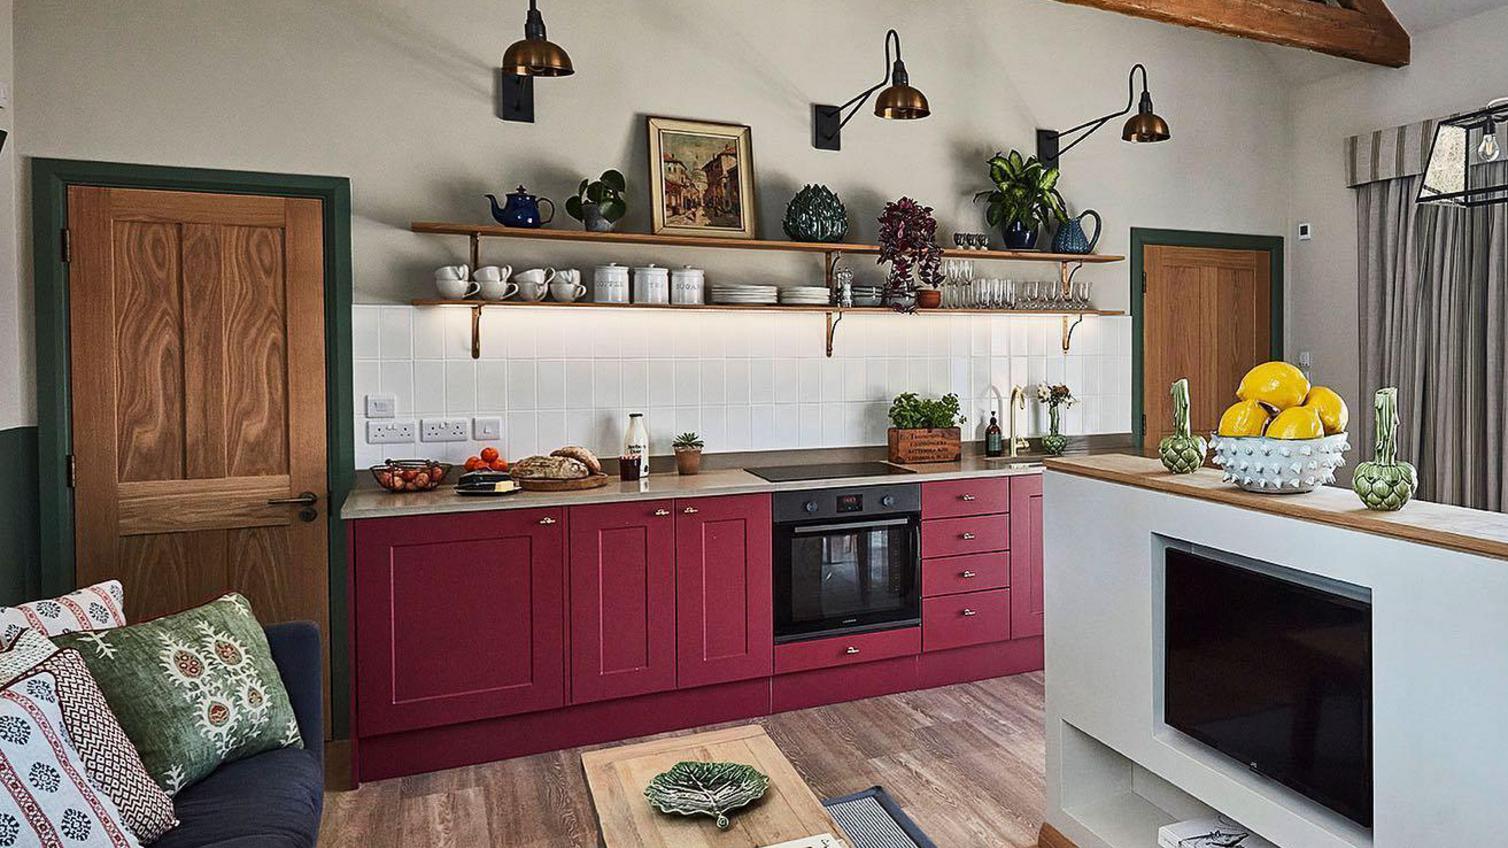 Wine red kitchen design in a single wall layout, with wooden beams, a wooden worktop, an open plan living room.